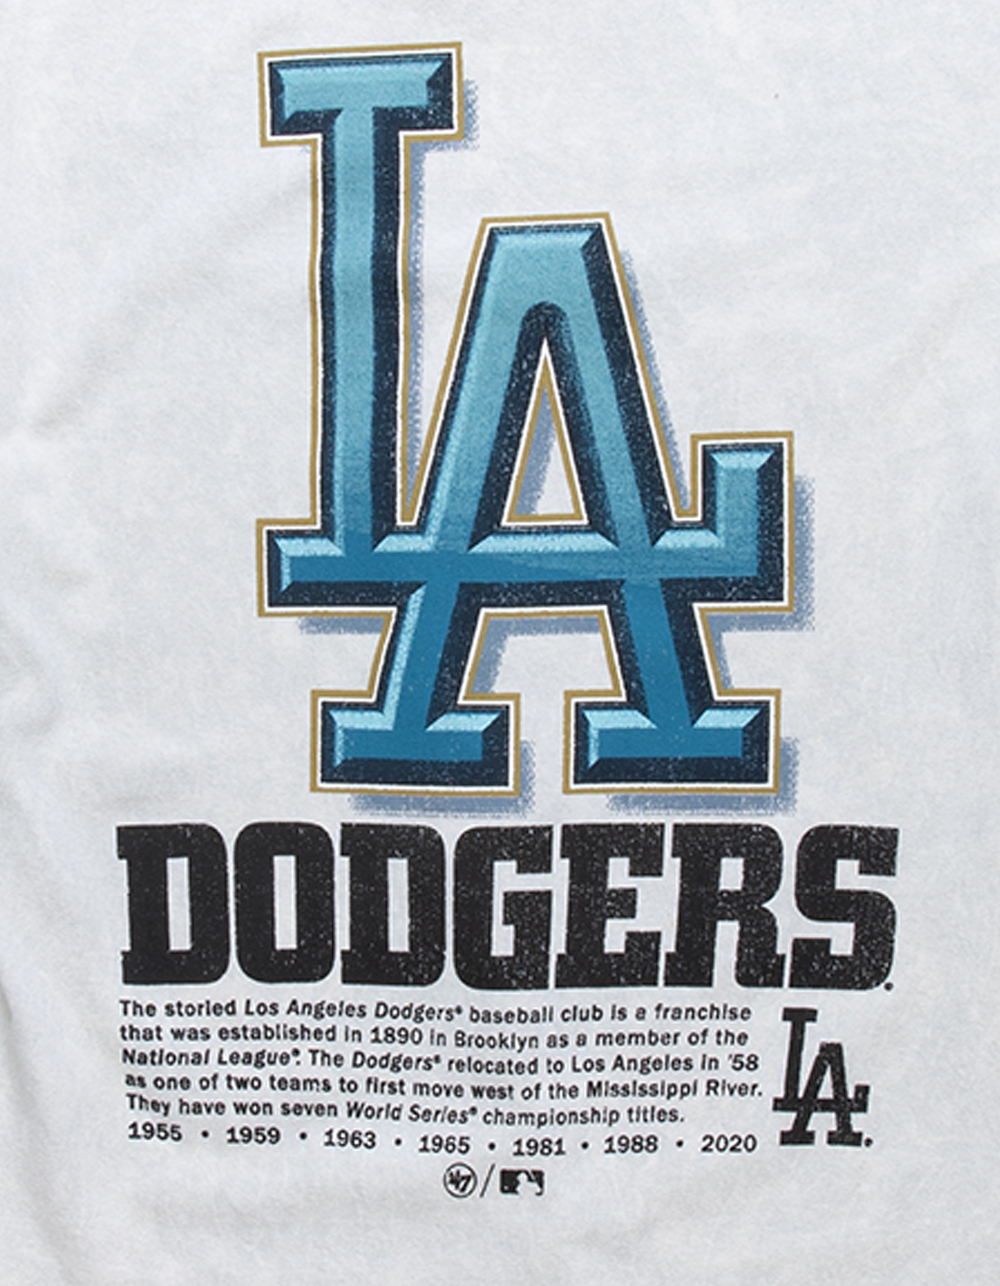 47 Brand LA Dodgers T-Shirt In Off Black With Chest And Back Print